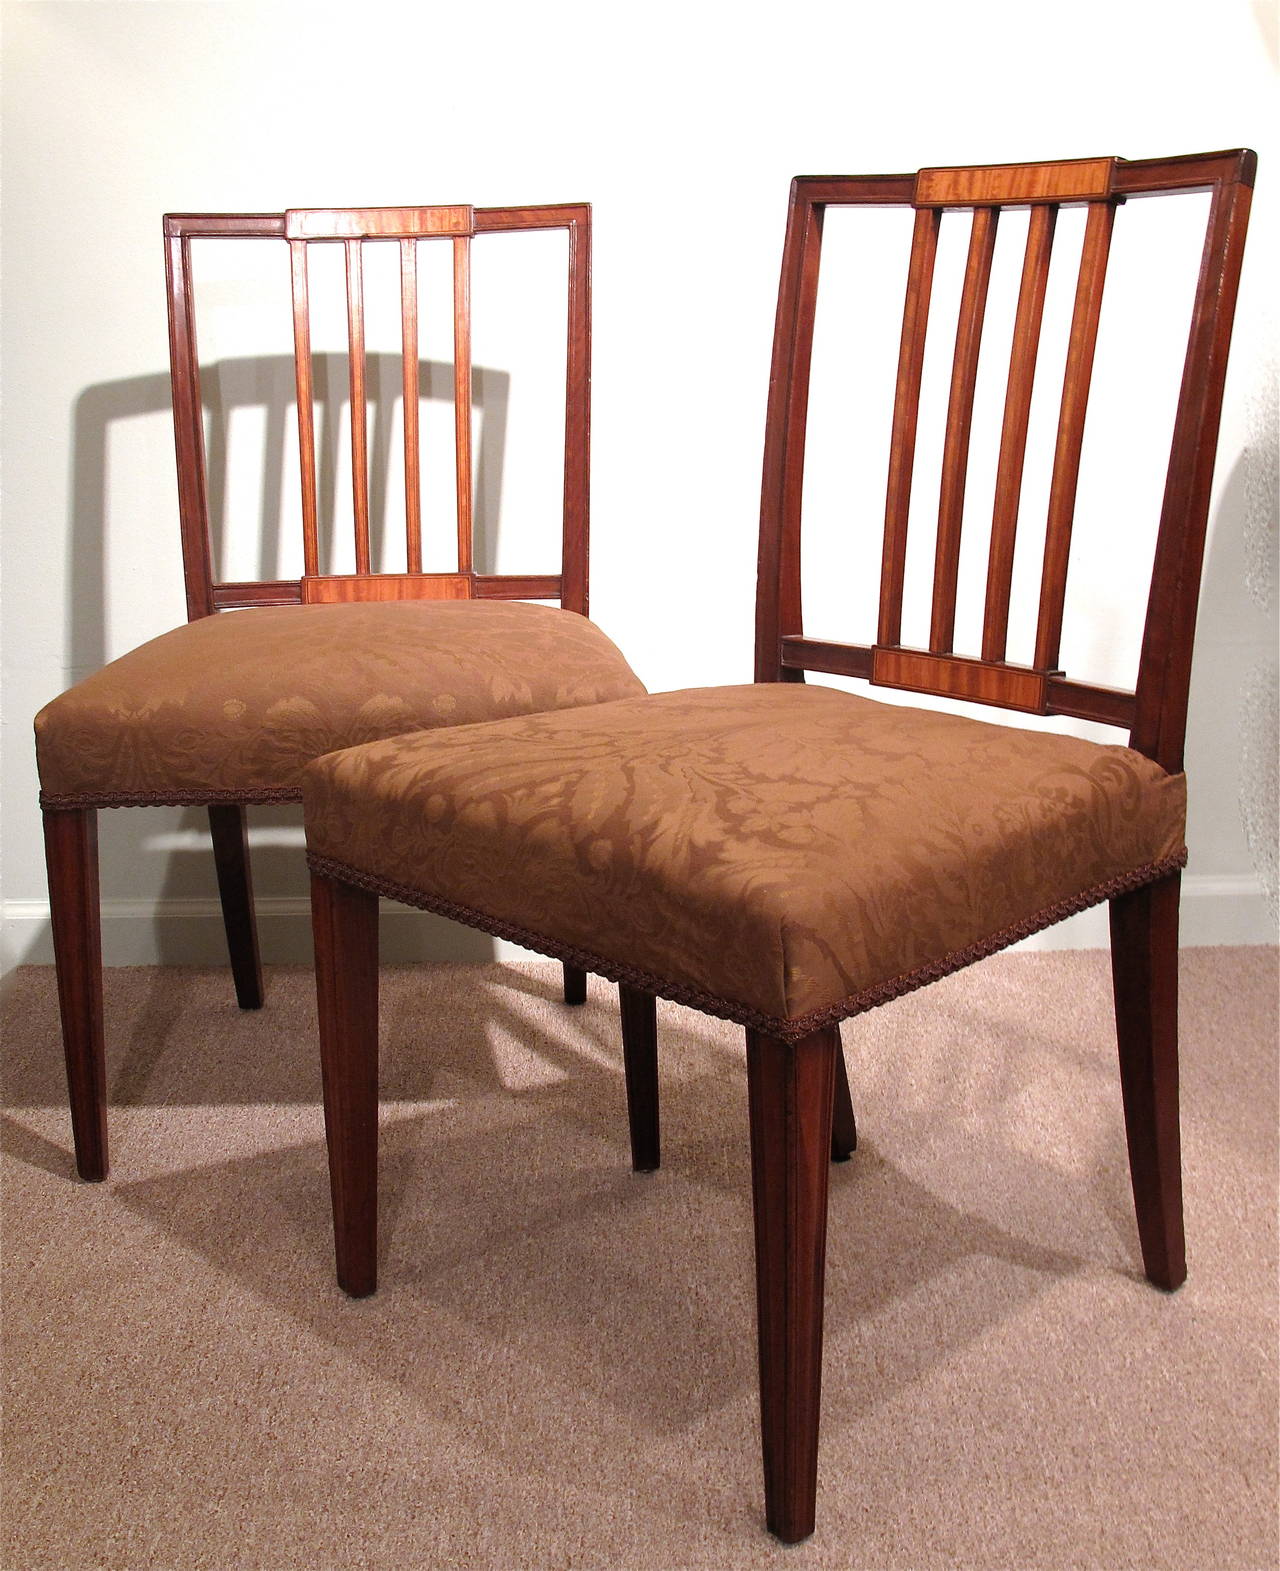 Comprised of 6 period chairs, along with four good early 20th century copies. Composed of mahogany inlaid with satinwood inlay. Squared four-barred backs each have slightly raised satinwood tablet terminals. Each satinwood tablet and splat is